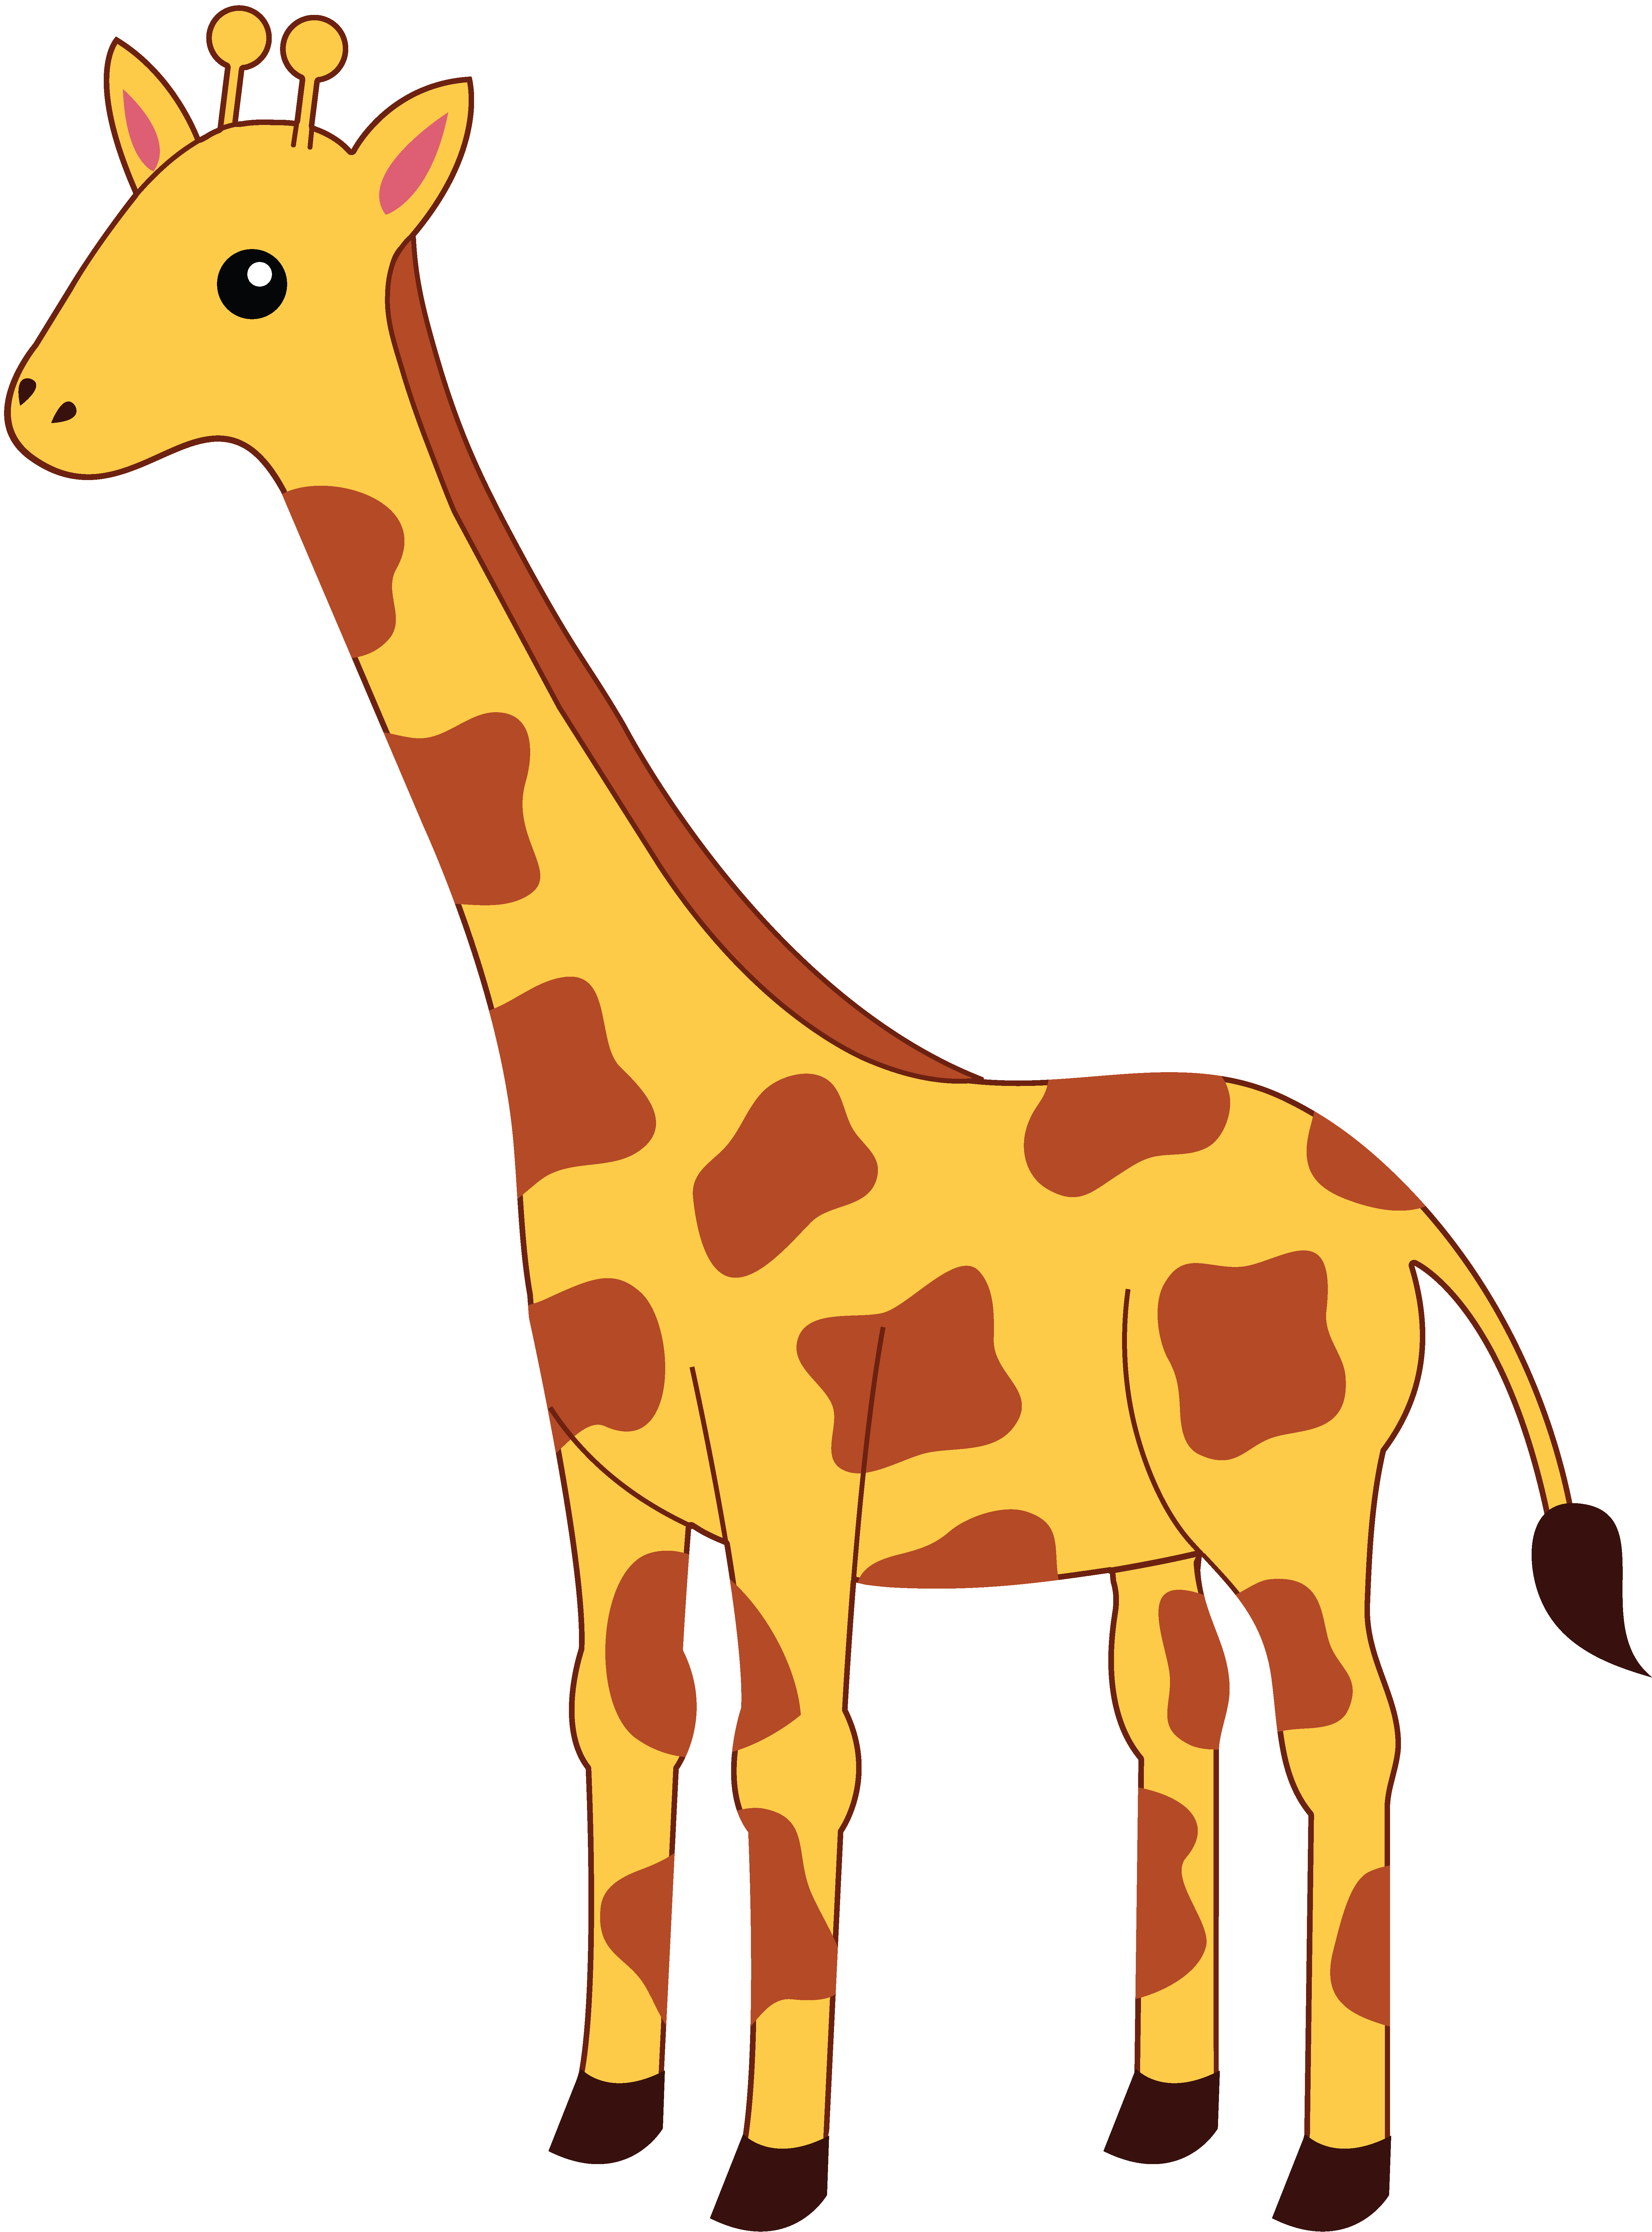 Giraffe Cartoon Pictures For Kids: Animated Giraffe Pictures ...